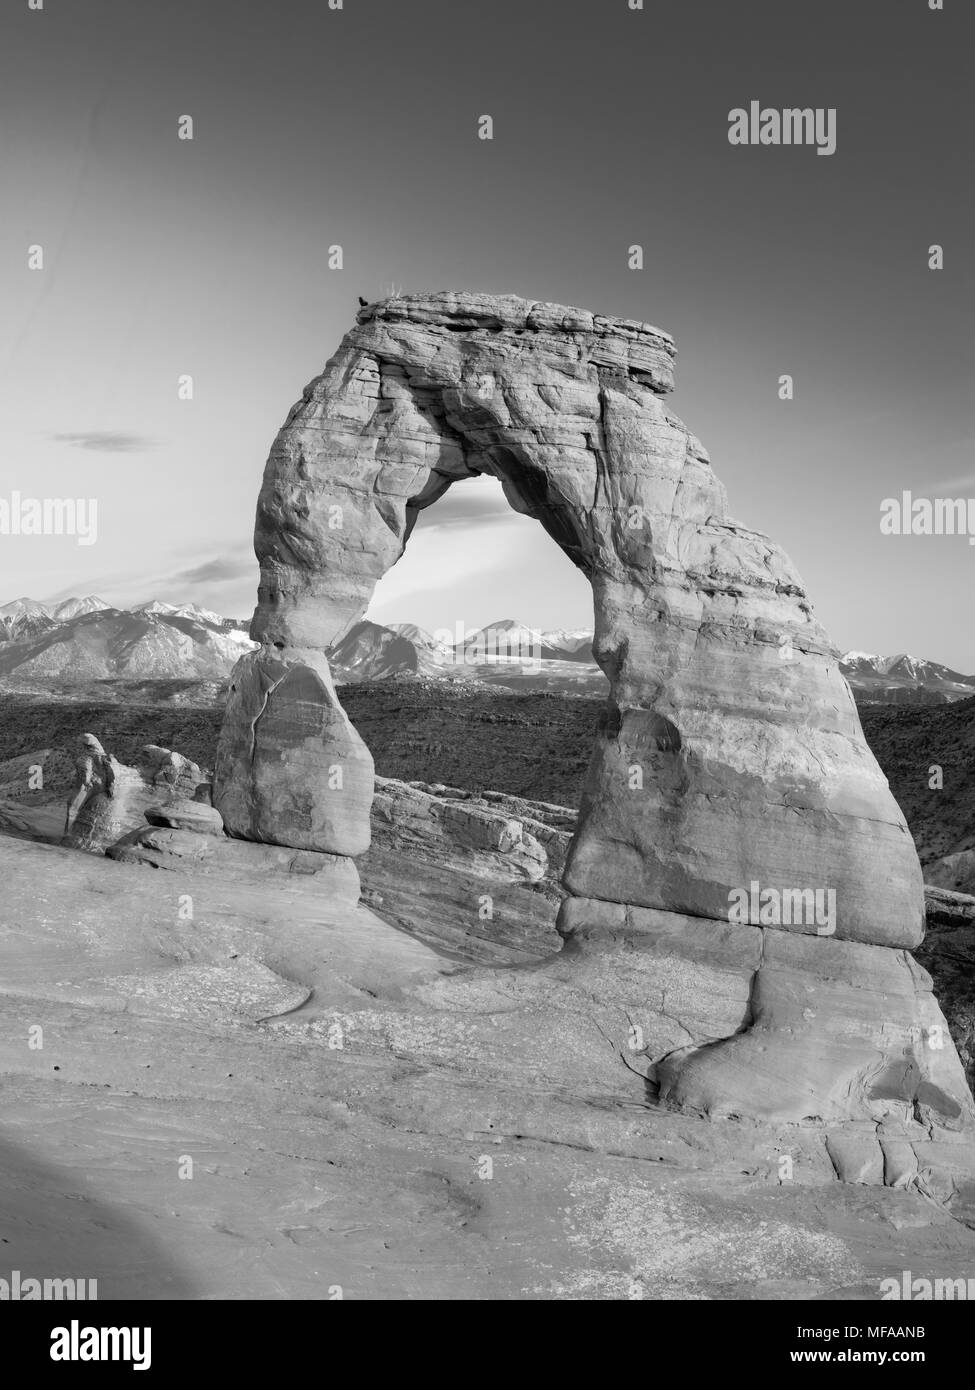 View of Delicate Arch with the La Sal Mountains in the background, nearing sunset; Arches National Park, Moab, Utah, USA. Stock Photo